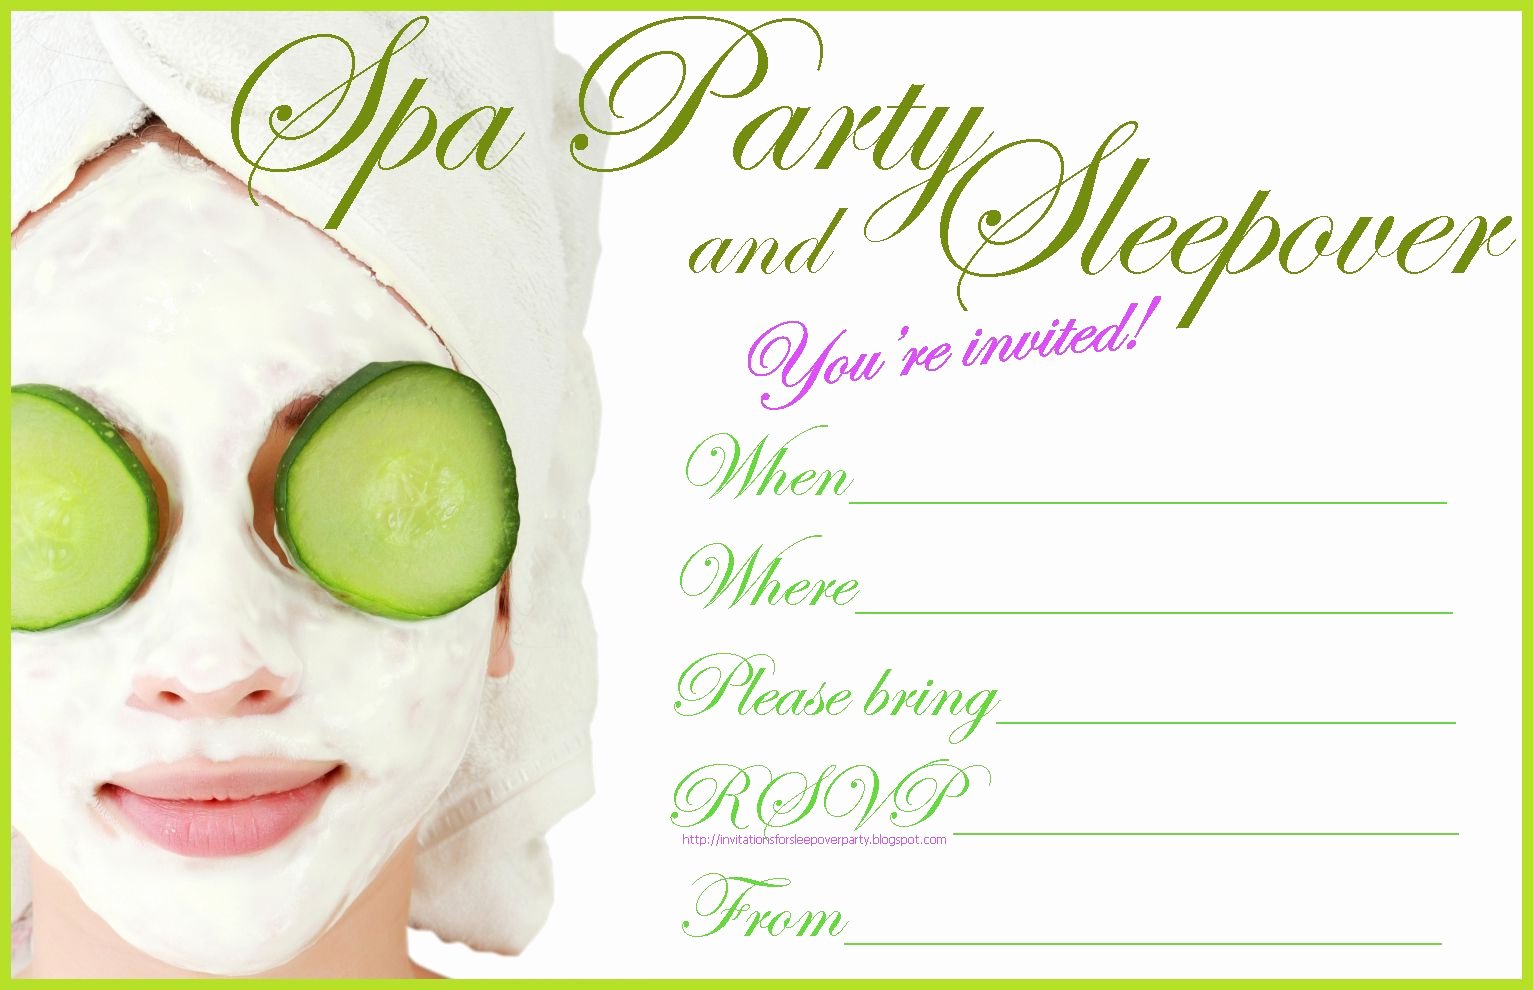 Spa Party Invitation Template Elegant Free Spa Party Invitation to Print if Your Sleepover is A